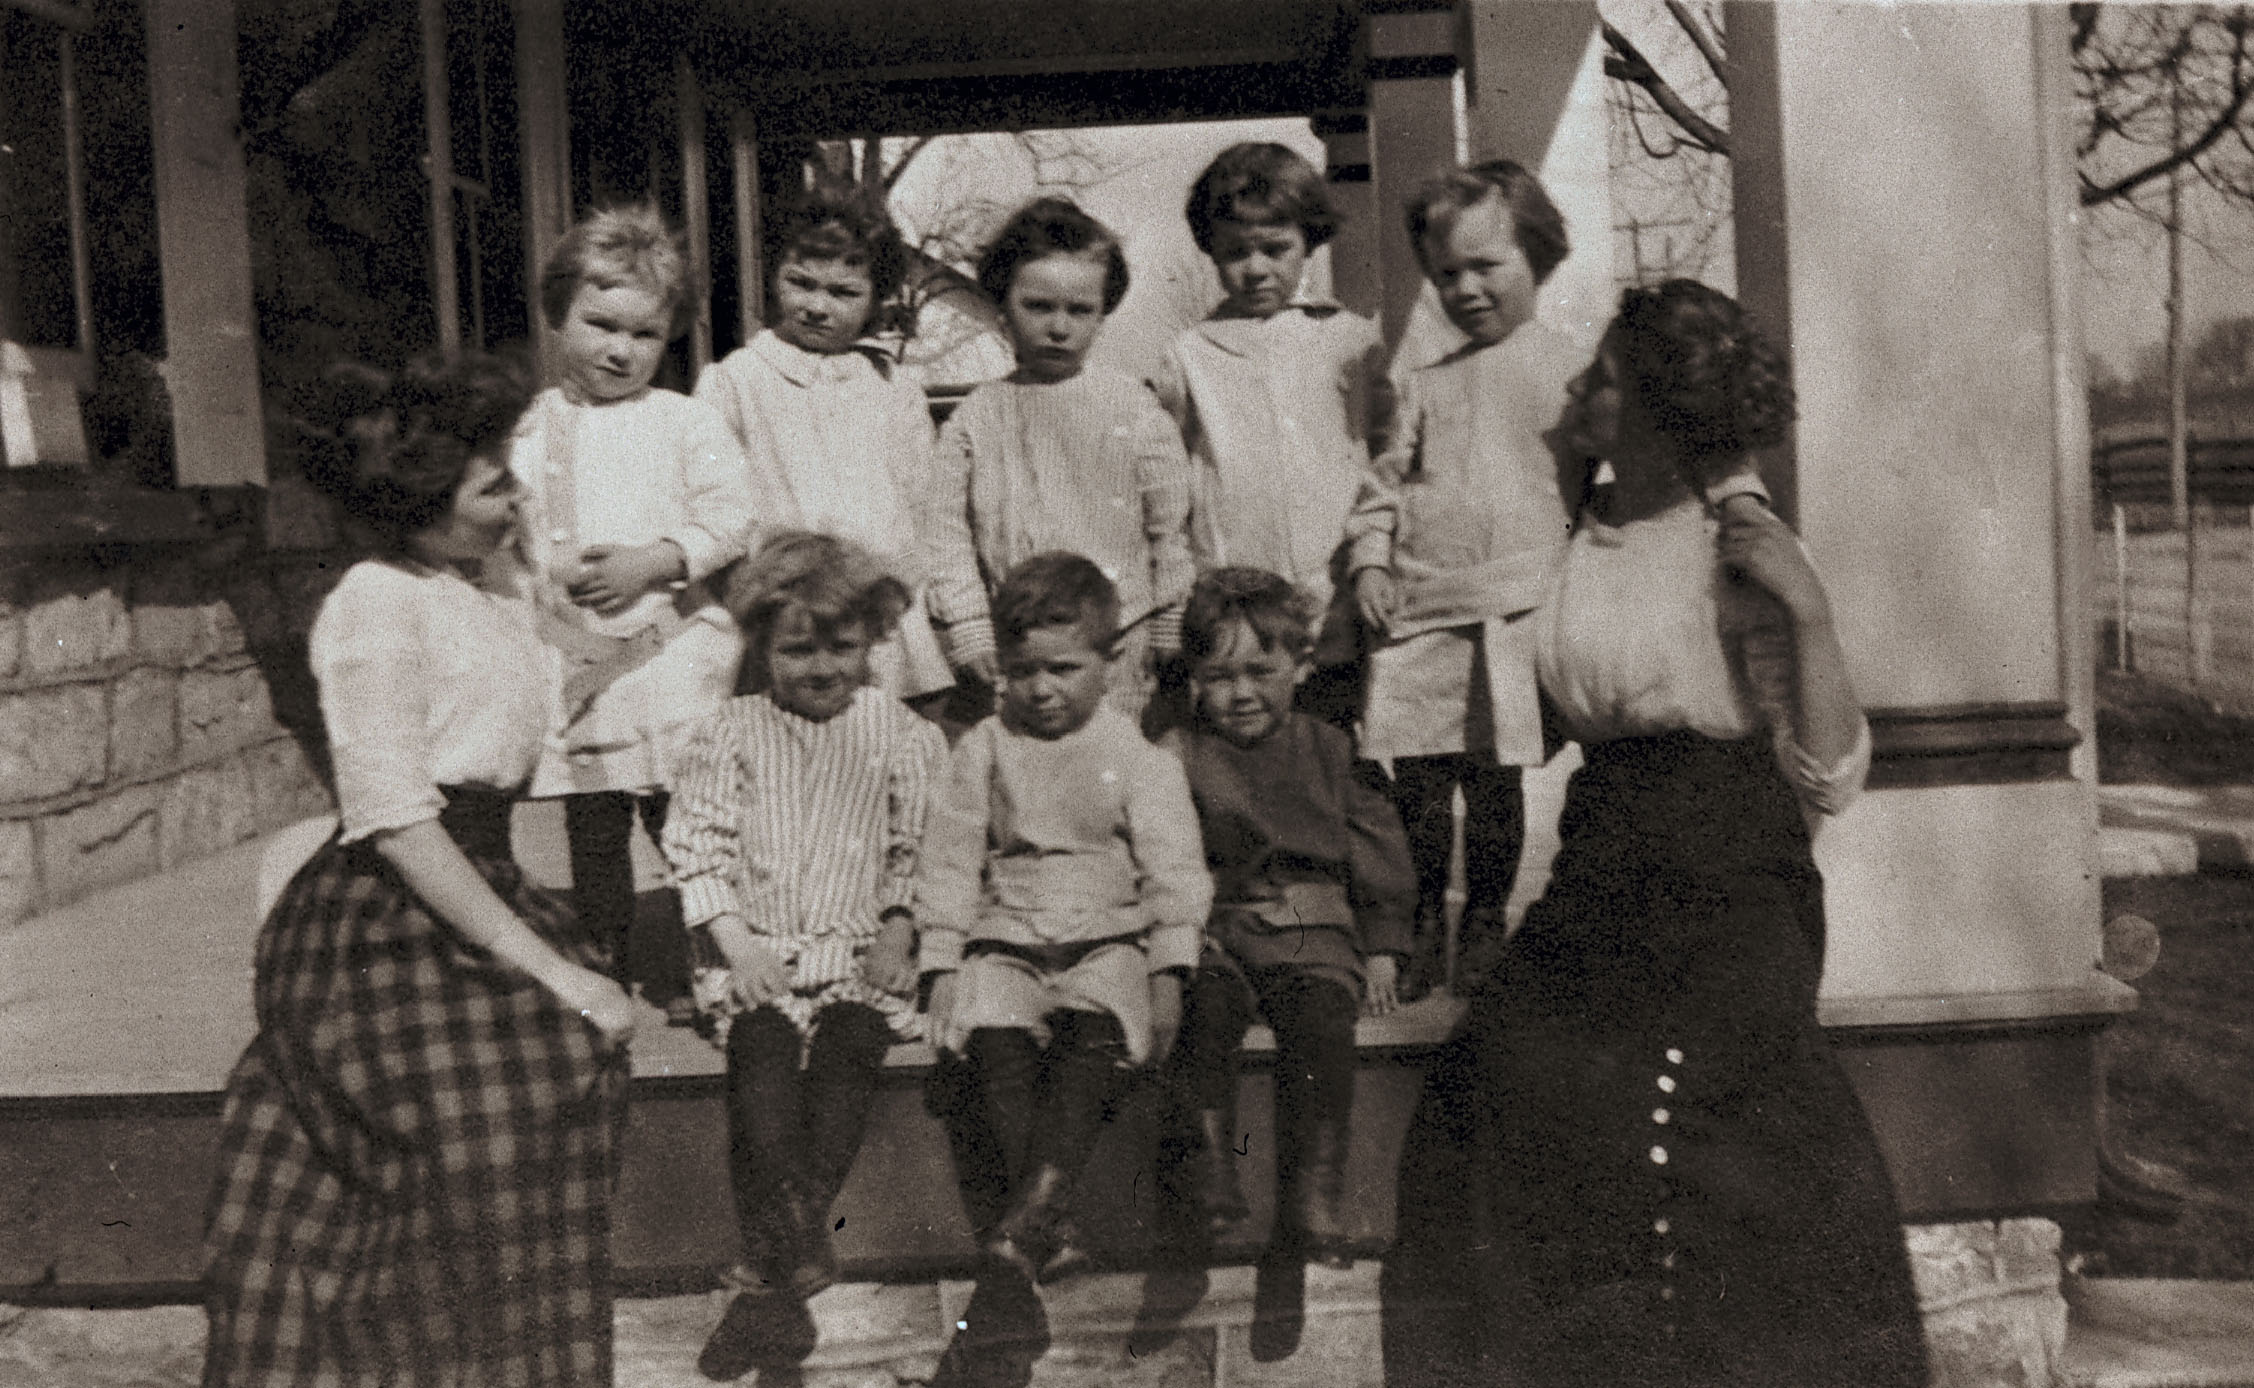 Students at Kinderhaus in 1914